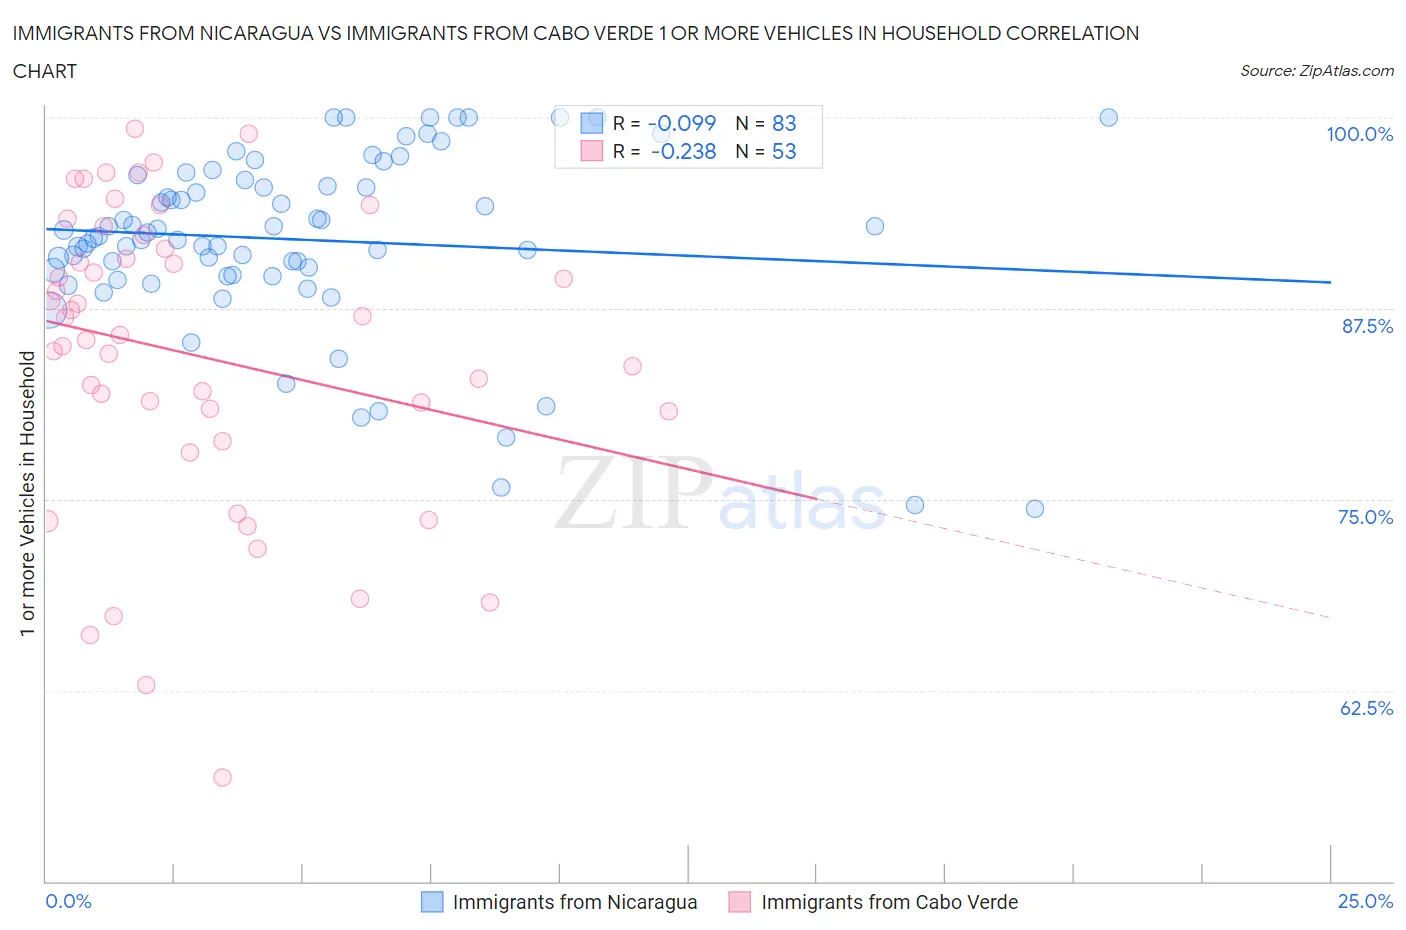 Immigrants from Nicaragua vs Immigrants from Cabo Verde 1 or more Vehicles in Household